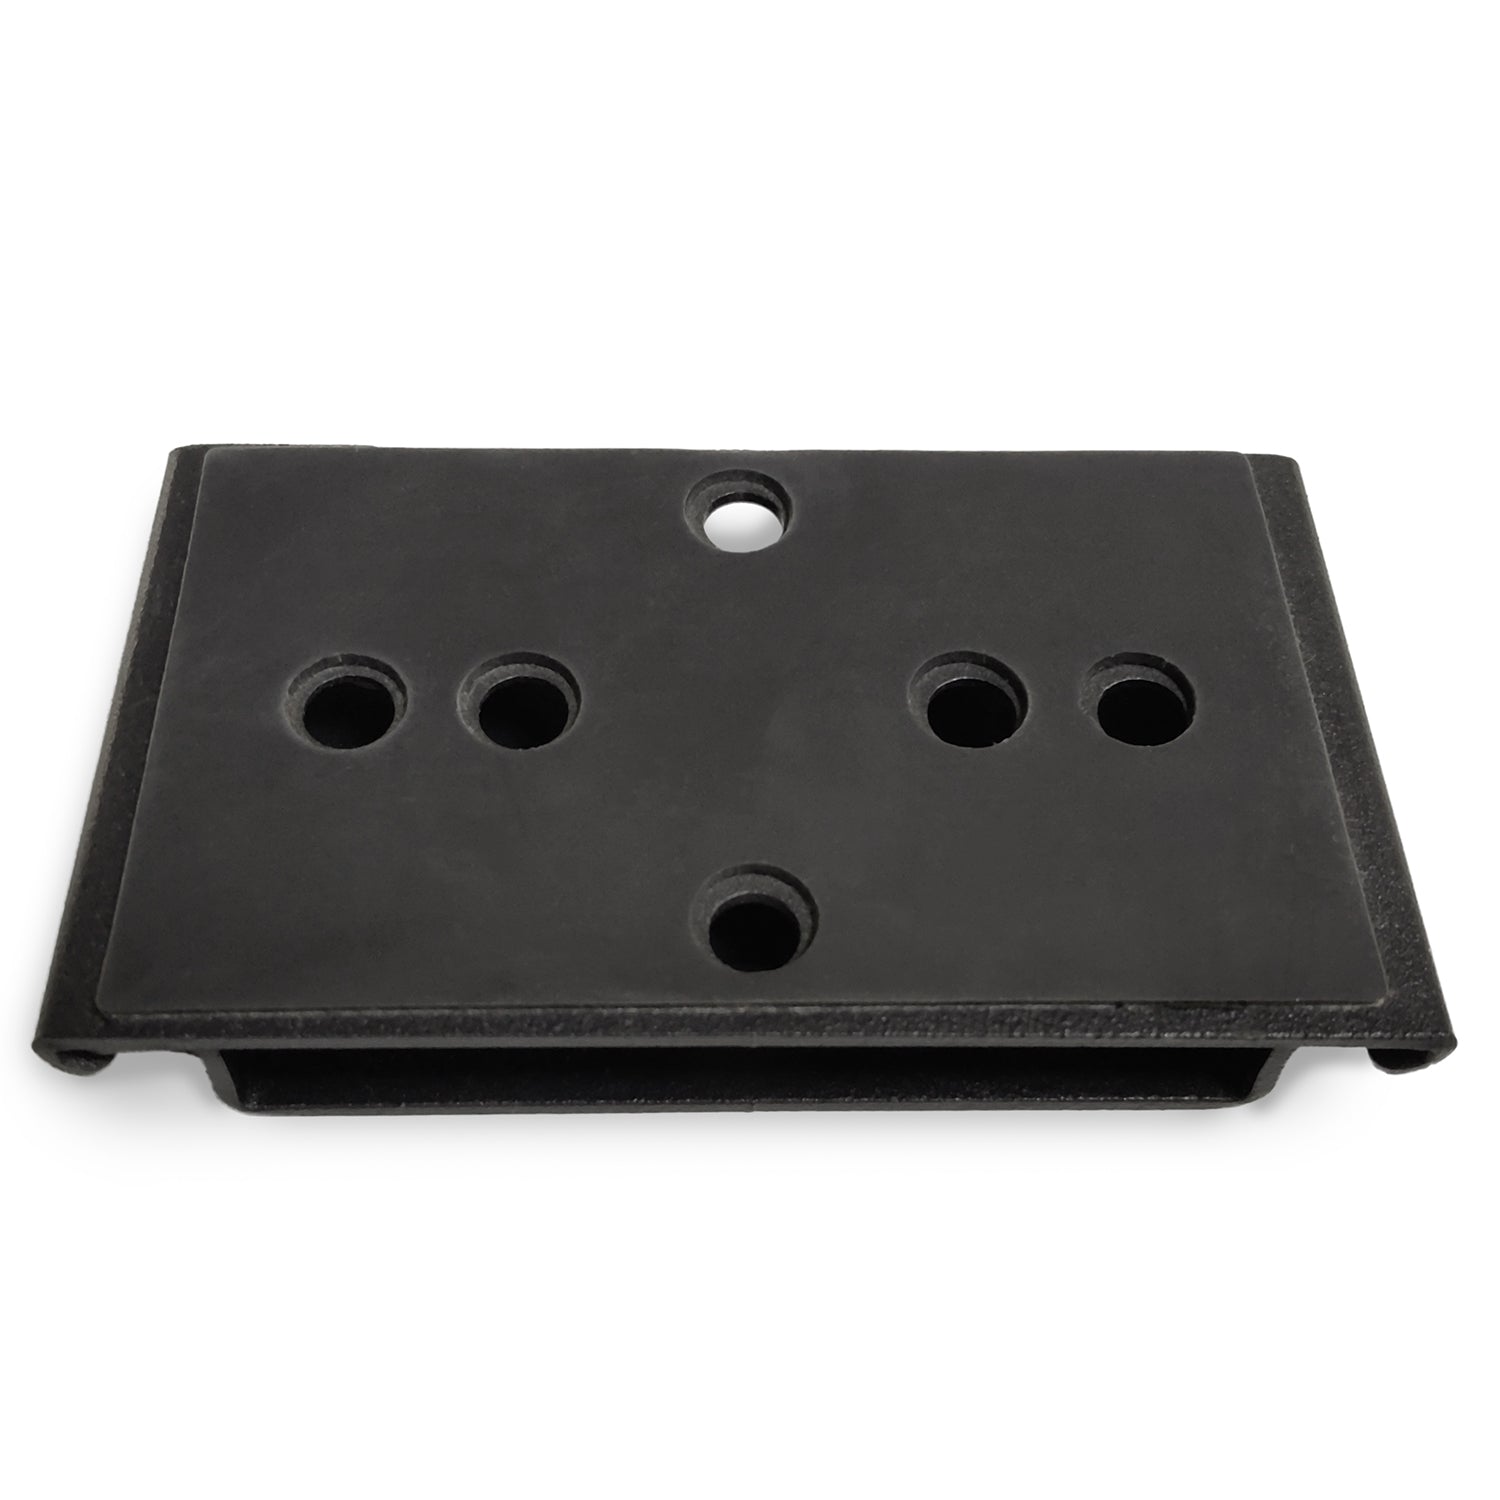 Aperion Audio Stealth Wall & Ceiling Mounting Kit Pair - A5, Bookshelf and Surround - Aperion Audio